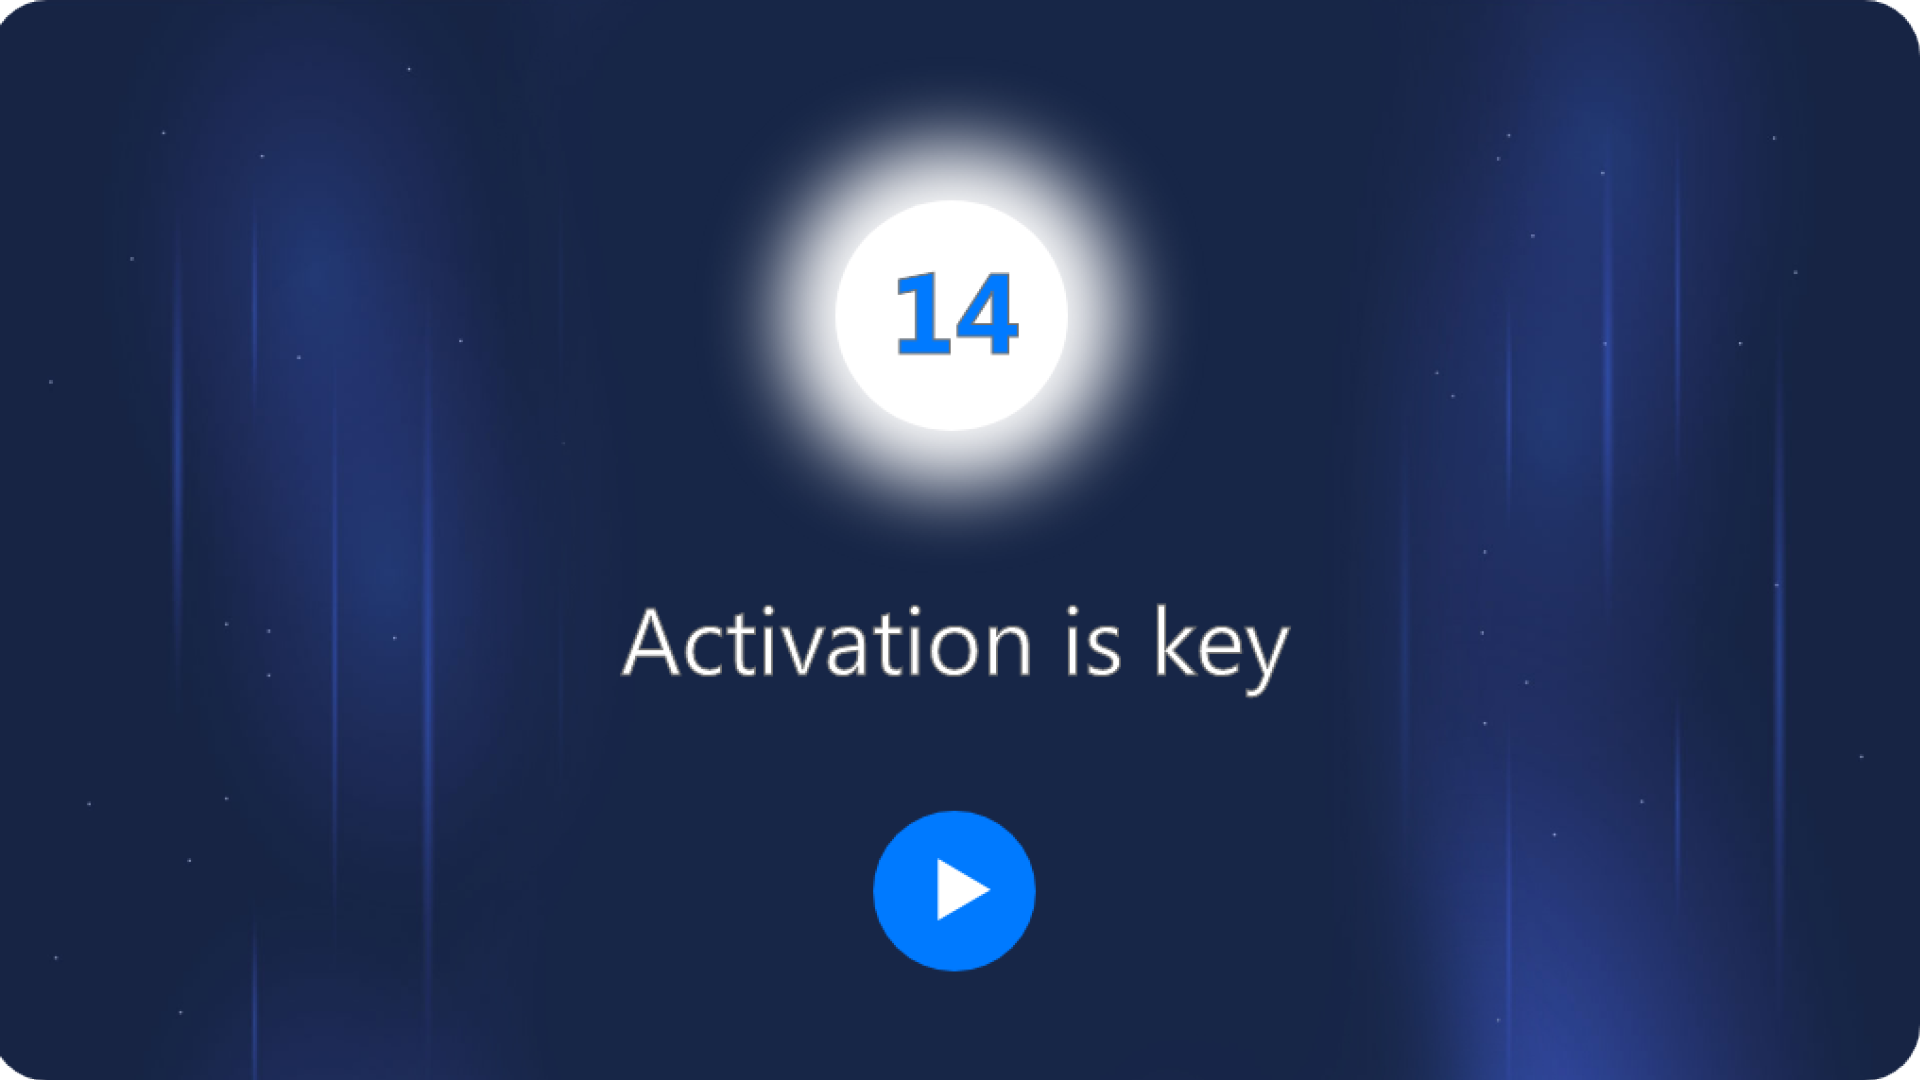 Activation is key